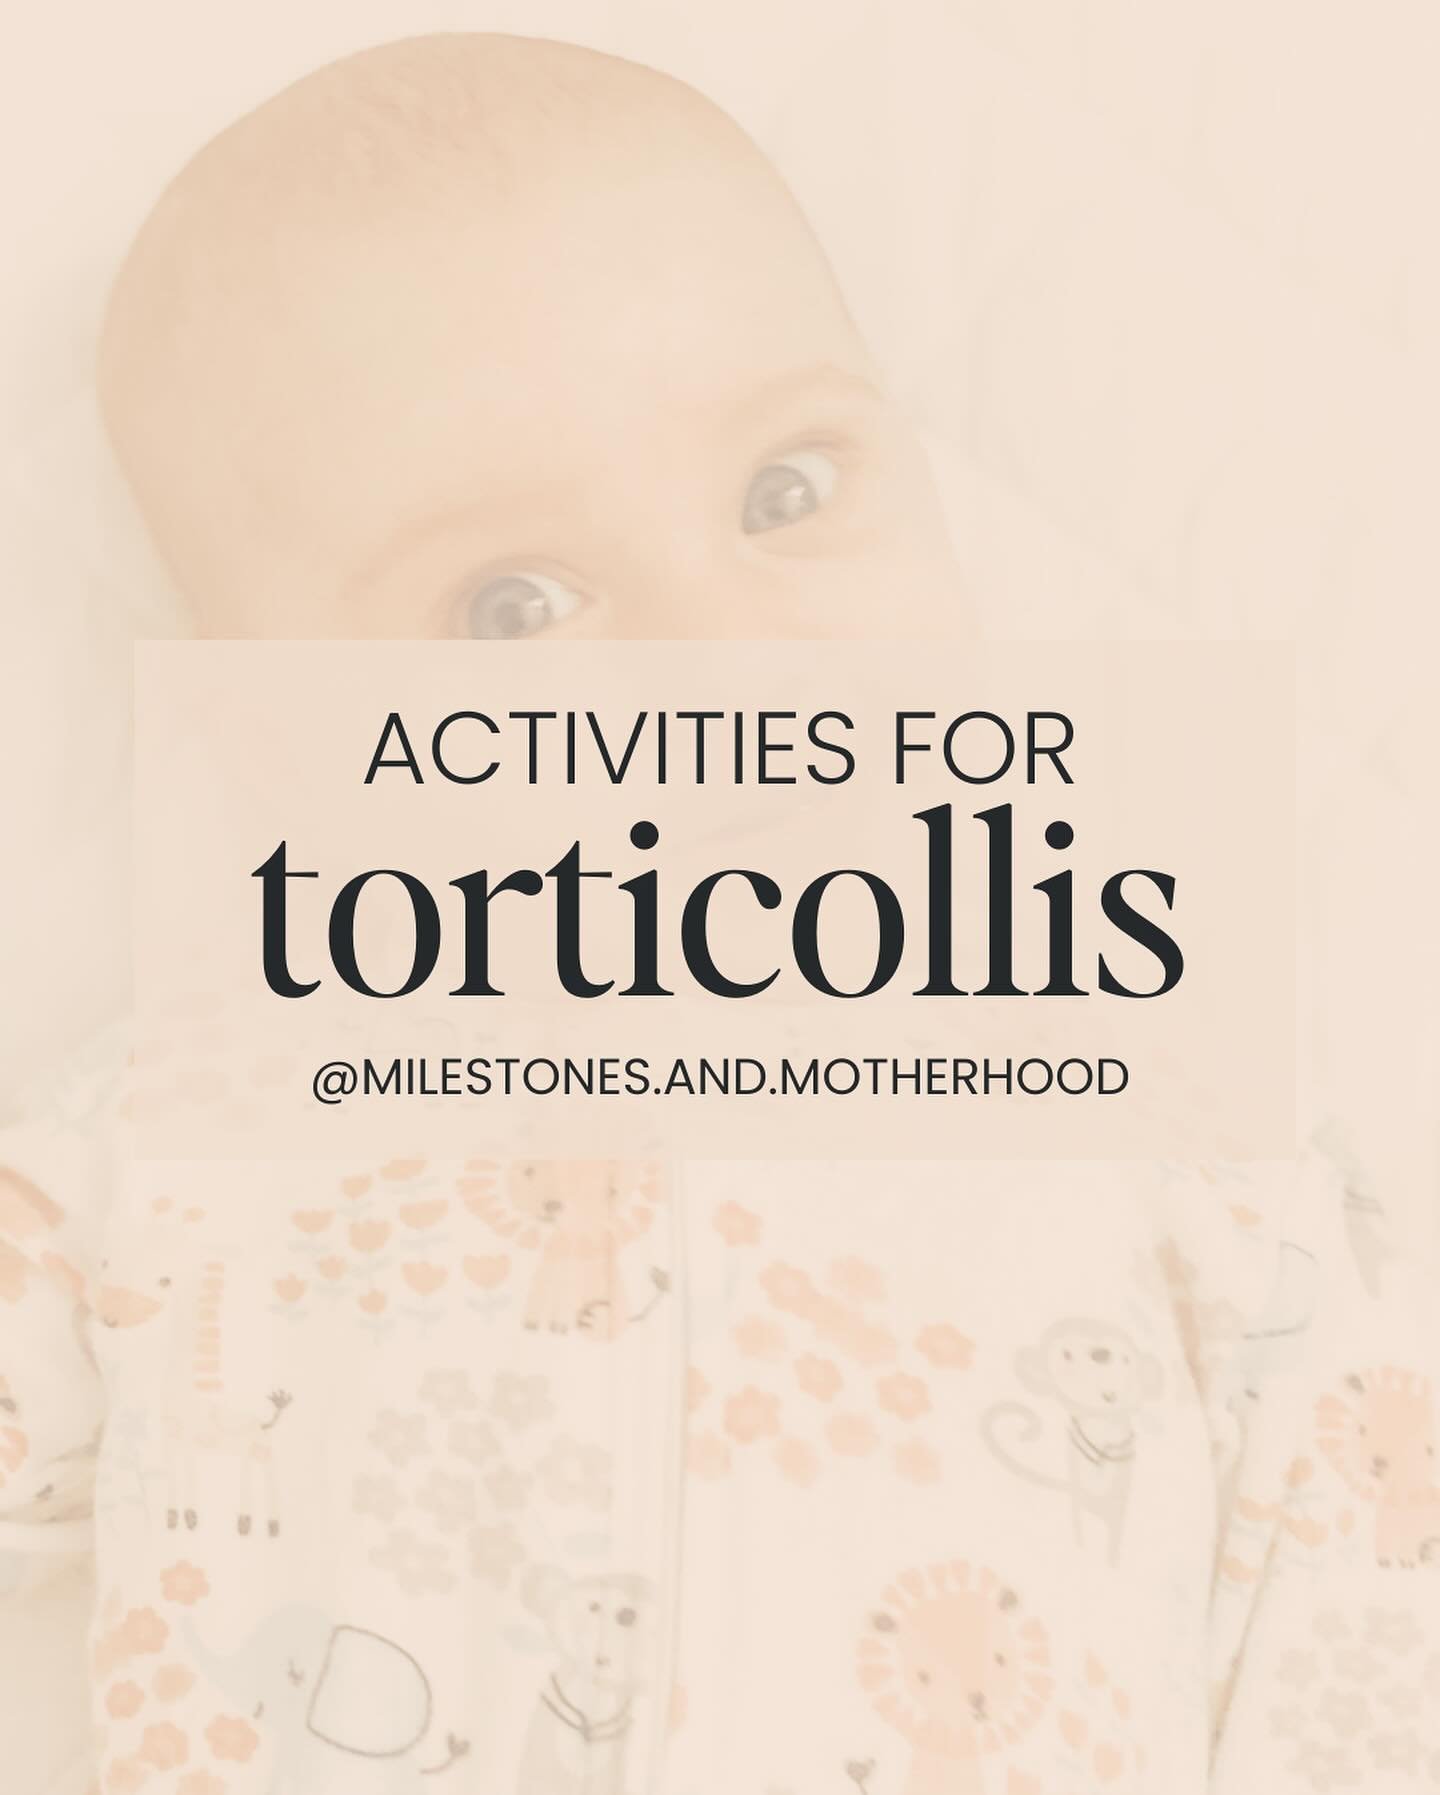 Let&rsquo;s talk gentle activities for torticollis!

Disclaimer: they should NOT be upset during these! If they are fighting against you, it is really only reinforcing what we are trying to avoid!

Tip 1: place toys on the side they do NOT prefer to 